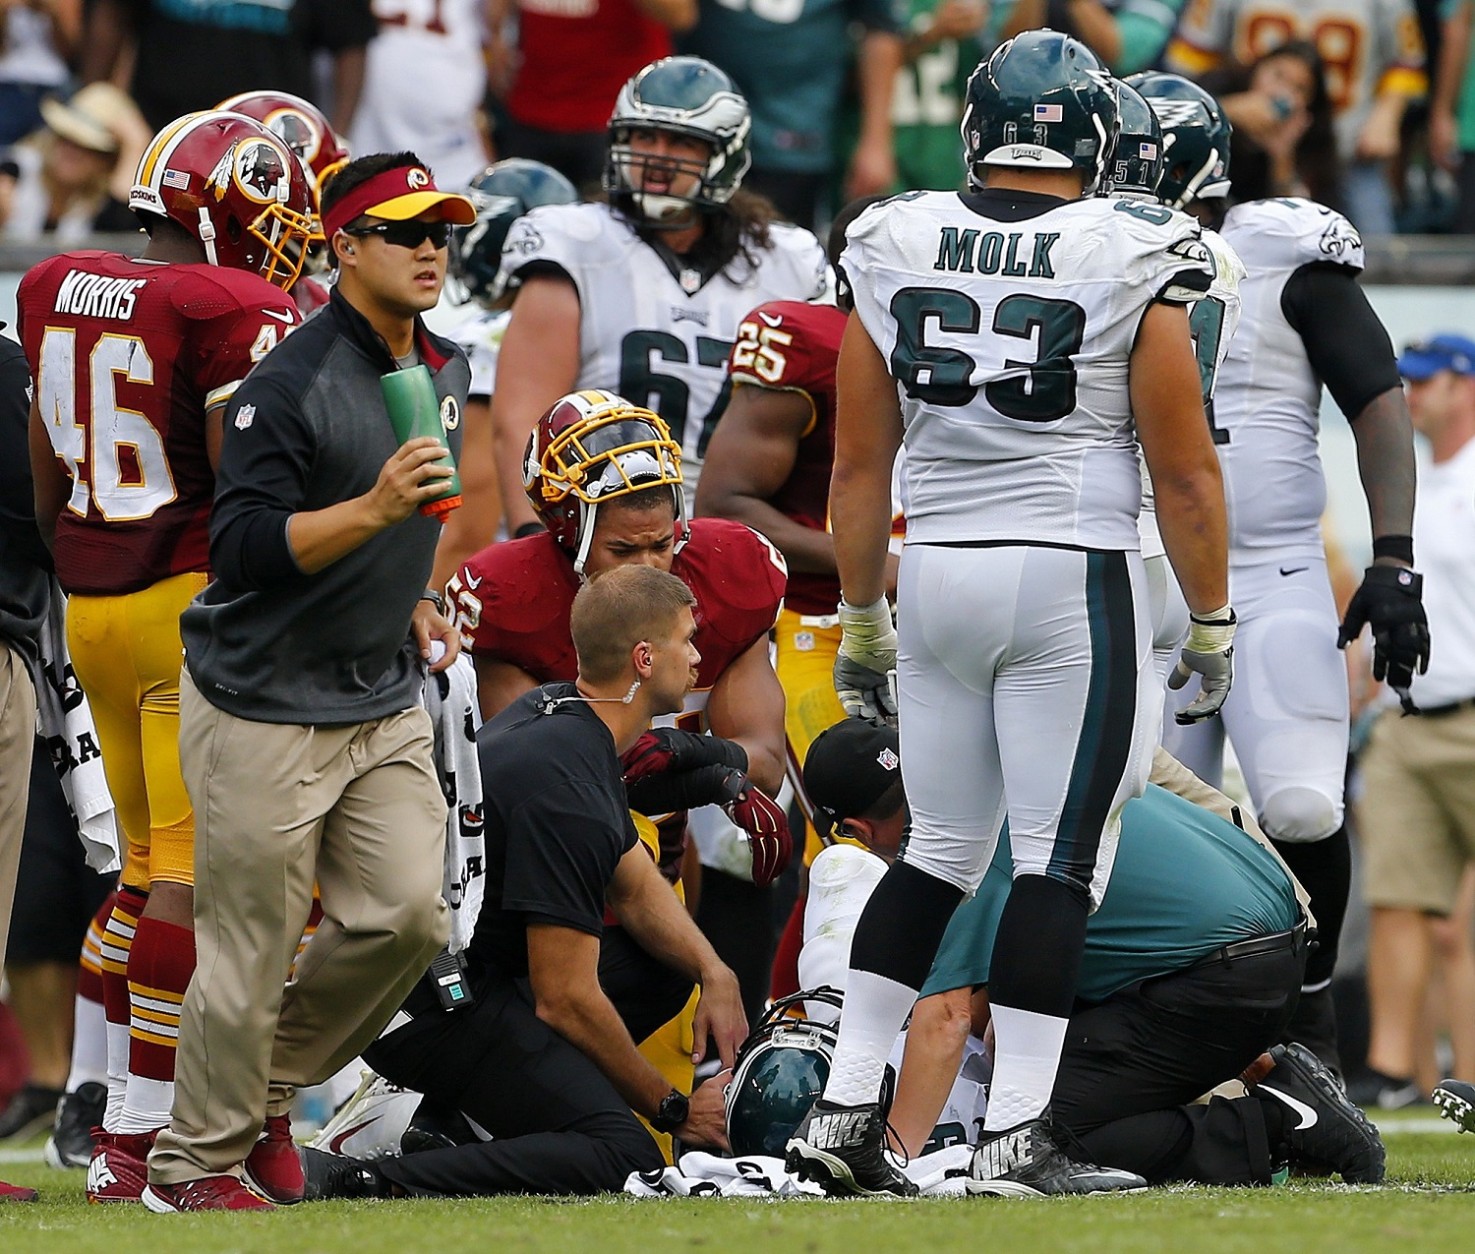 PHILADELPHIA, PA - SEPTEMBER 21: Nick Foles #9 of the Philadelphia Eagles is looked after by medical personal after being hit by Chris Baker #92 of the Washington Redskins during the fourth quarter of a football game at Lincoln Financial Field on September 21, 2014 in Philadelphia, Pennsylvania. Foles returned to the game but Baker was ejected. (Photo by Rich Schultz /Getty Images)